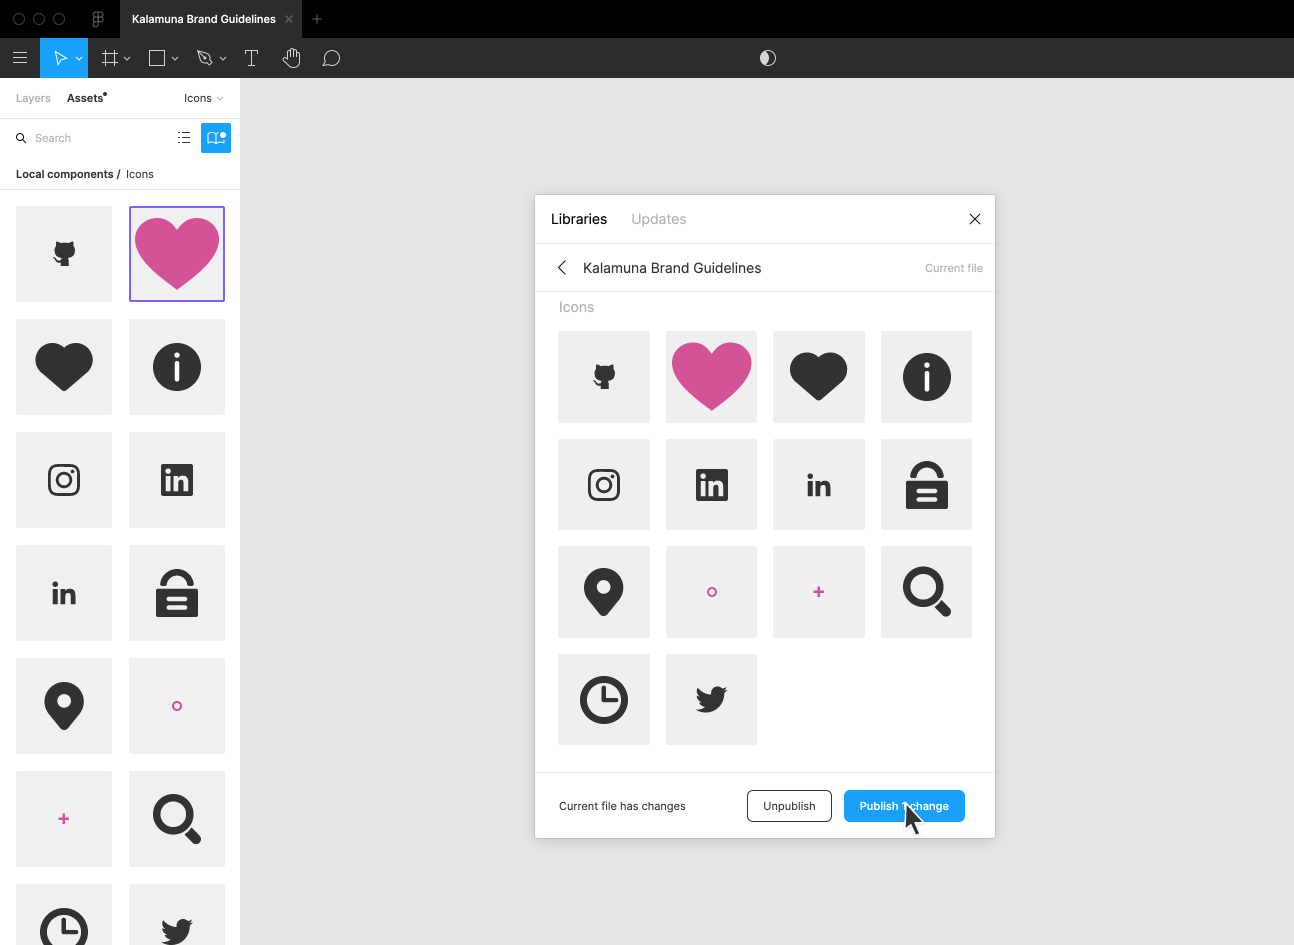 Examples of different Components like a pink heart, social media icons like LinkedIn and Instagram published to the Kalamuna Team Library.